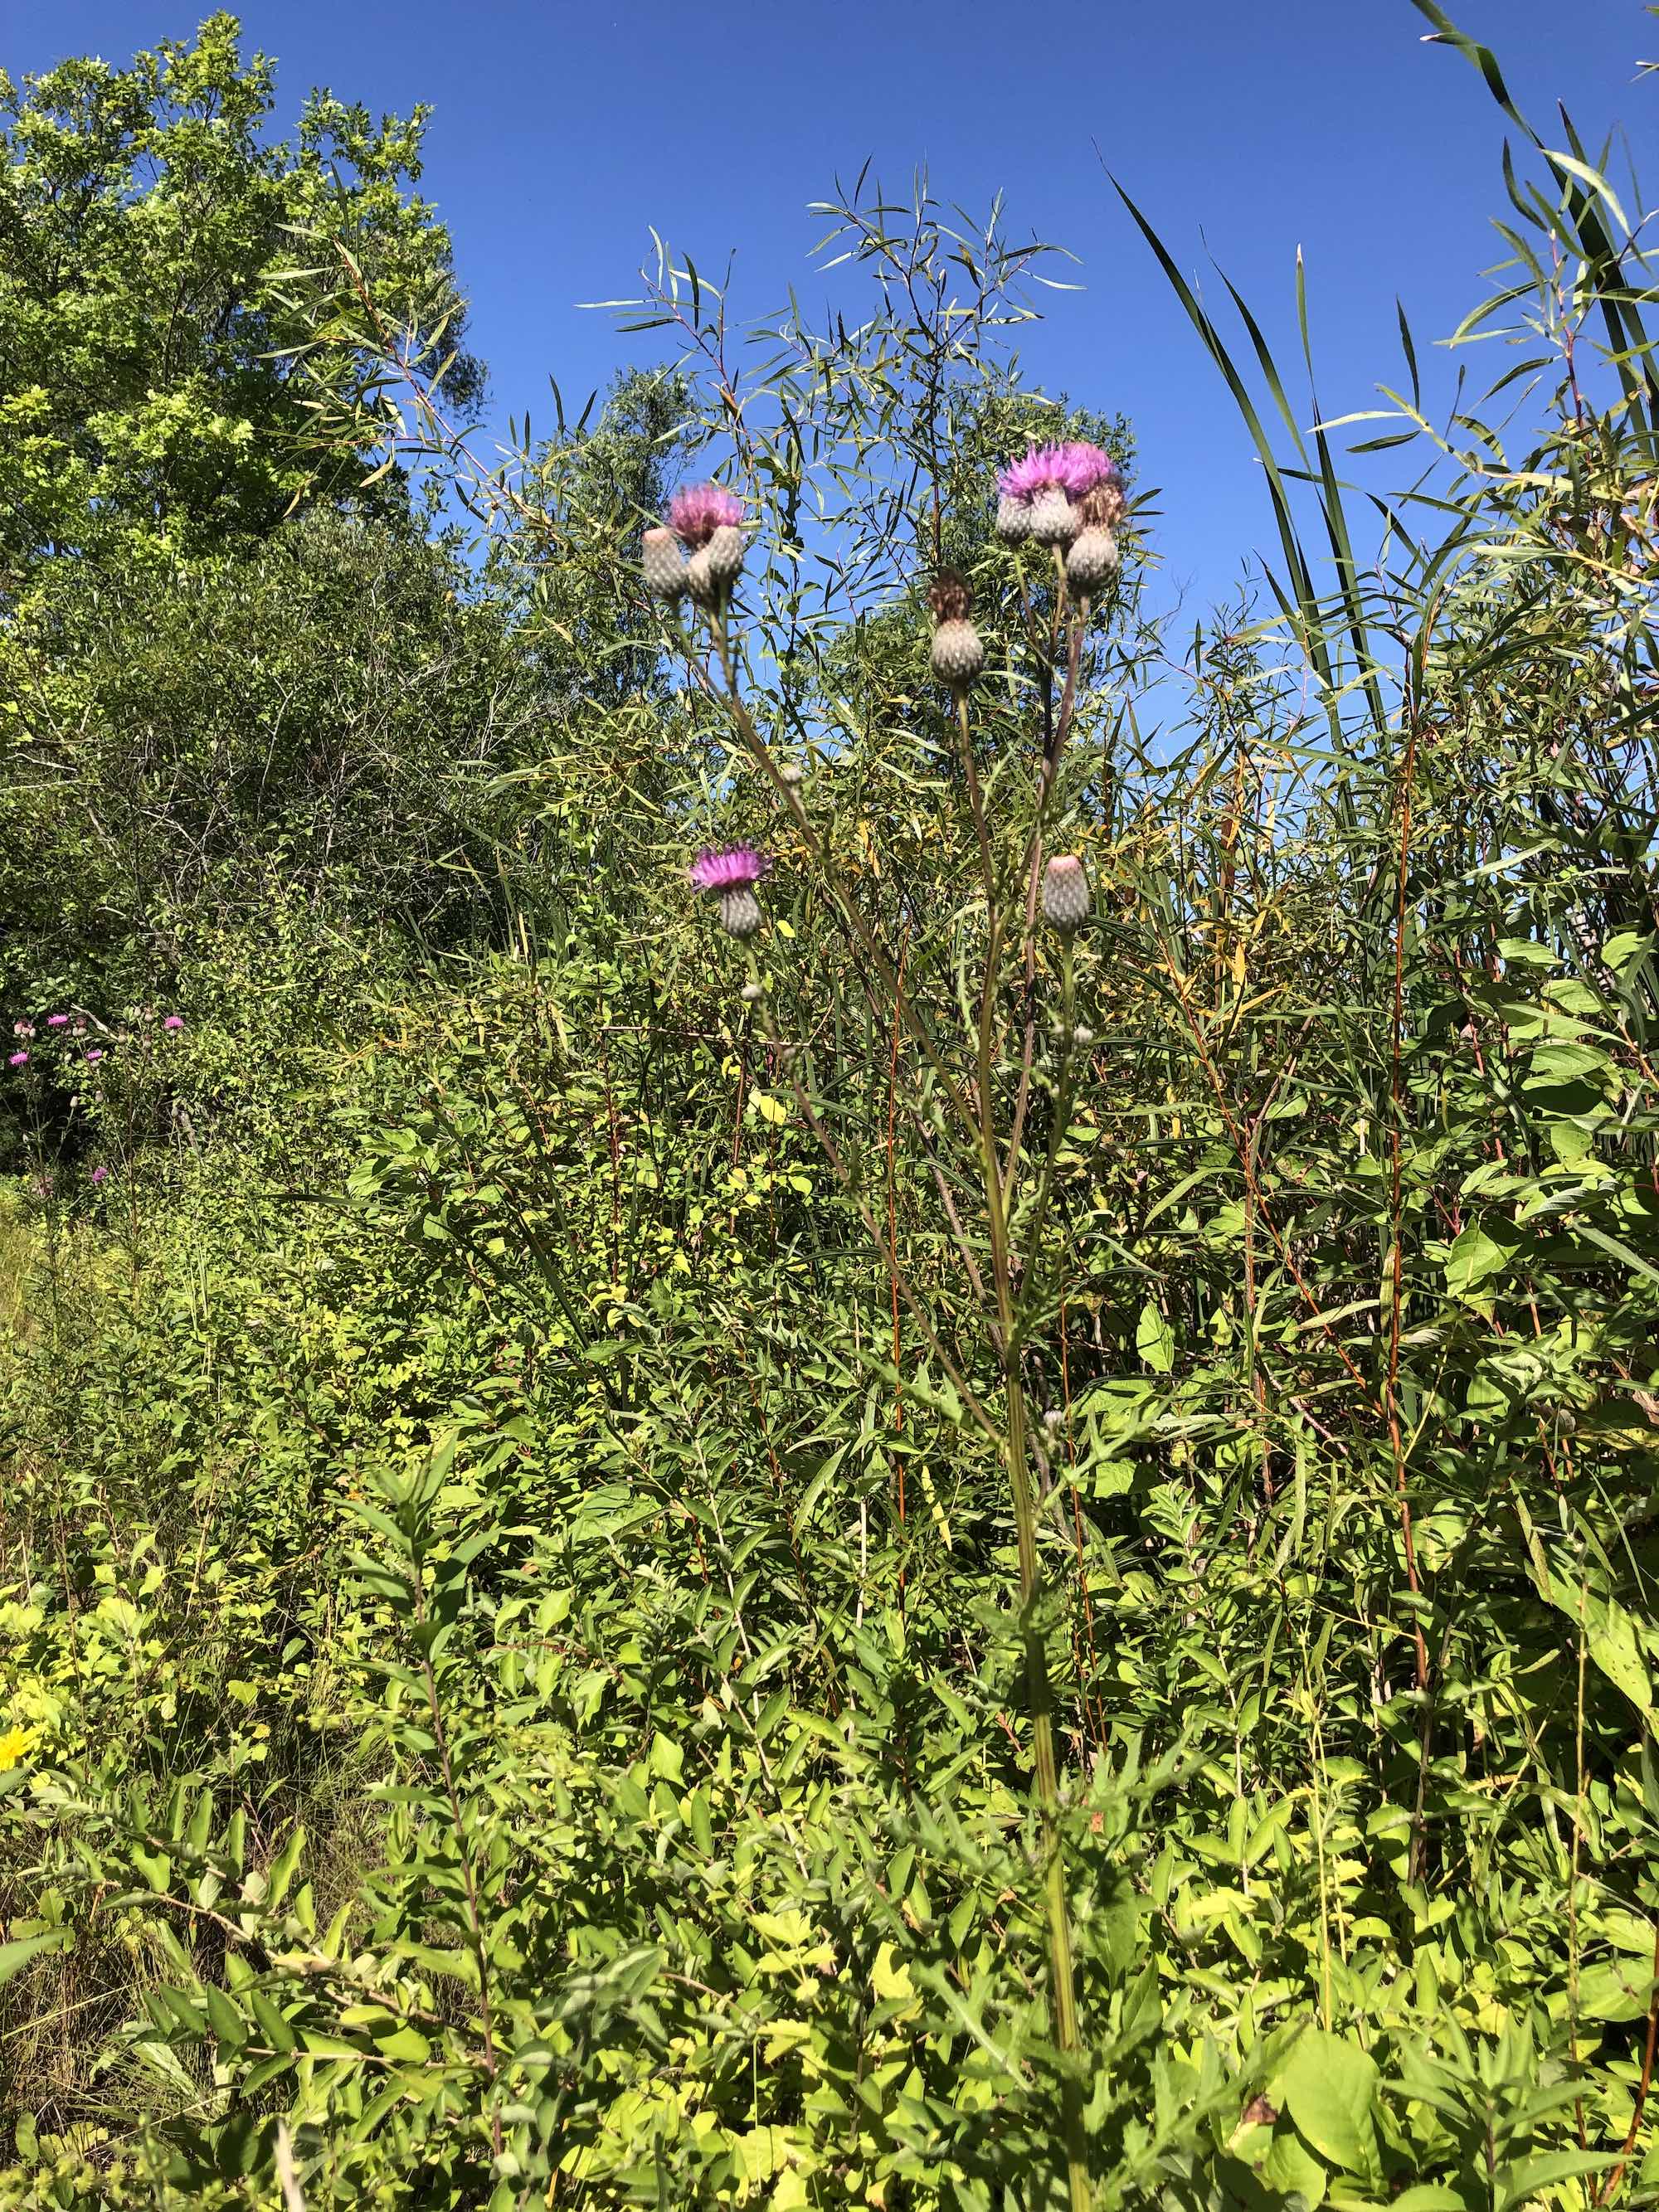 Swamp Thistle near cattails along shore of Lake Wingra along Arboretum Drive in Madison, Wisconsin on August 30, 2022.